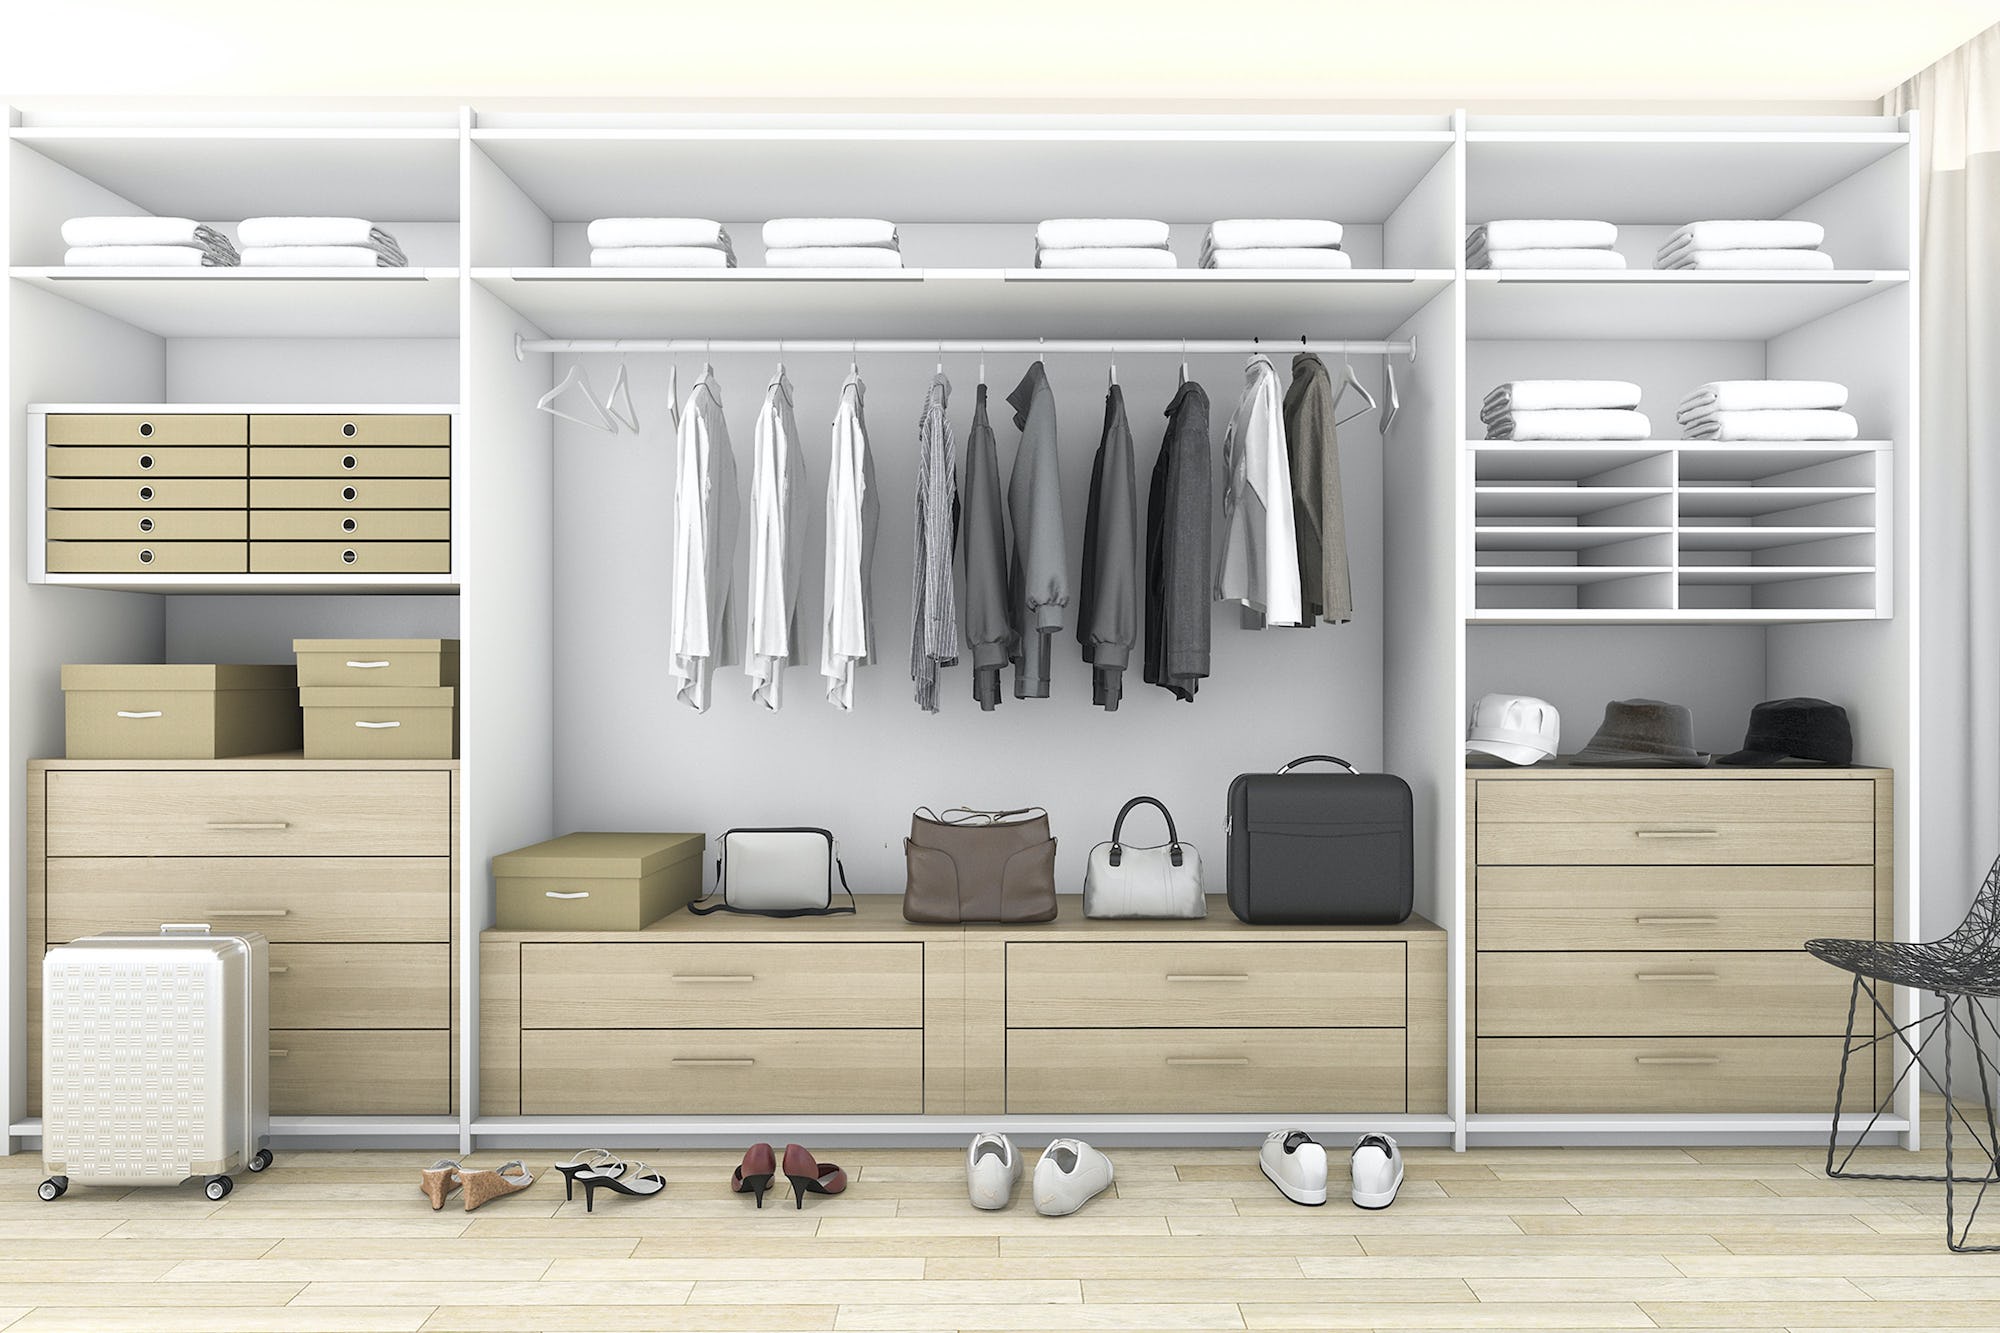 A well-organised wardrobe, a simple home upgrade for attracting renters